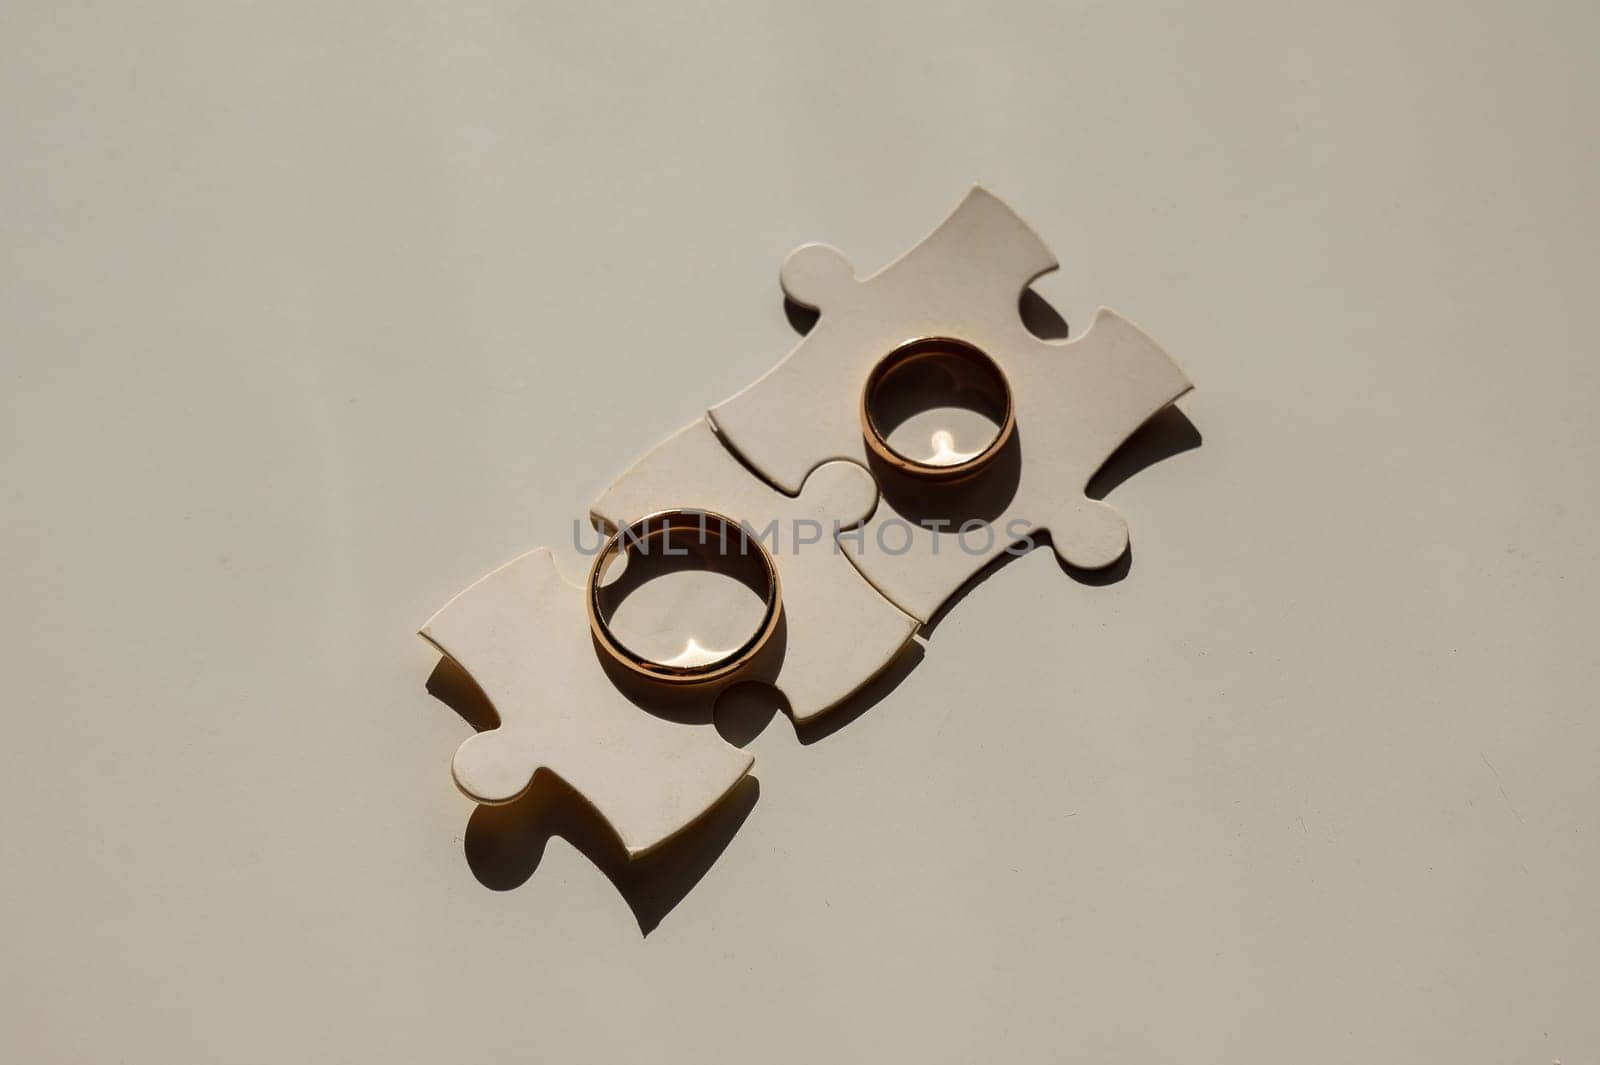 Wedding rings and puzzle pieces. Husband and wife complement each other perfectly. by mrwed54